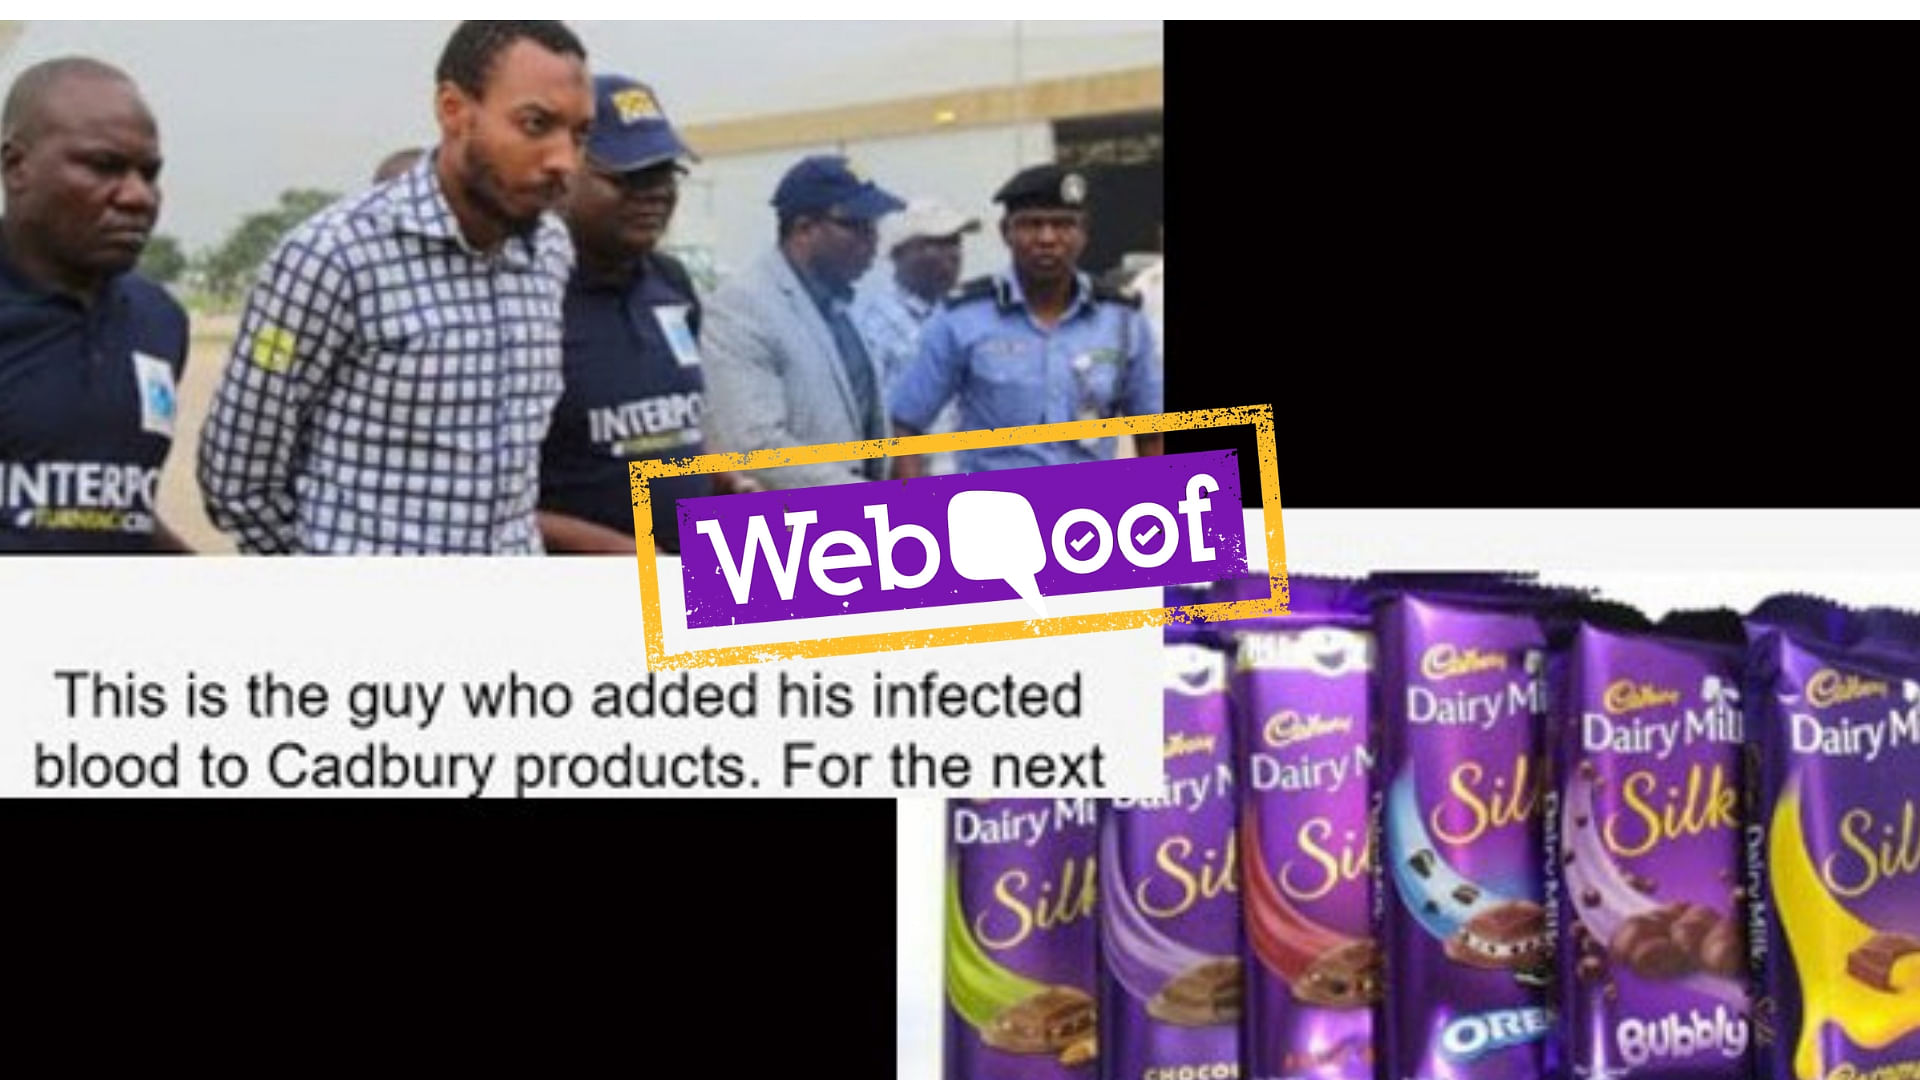 A message went viral on social media urging people to avoid buying Cadbury products as they were contaminated with HIV.